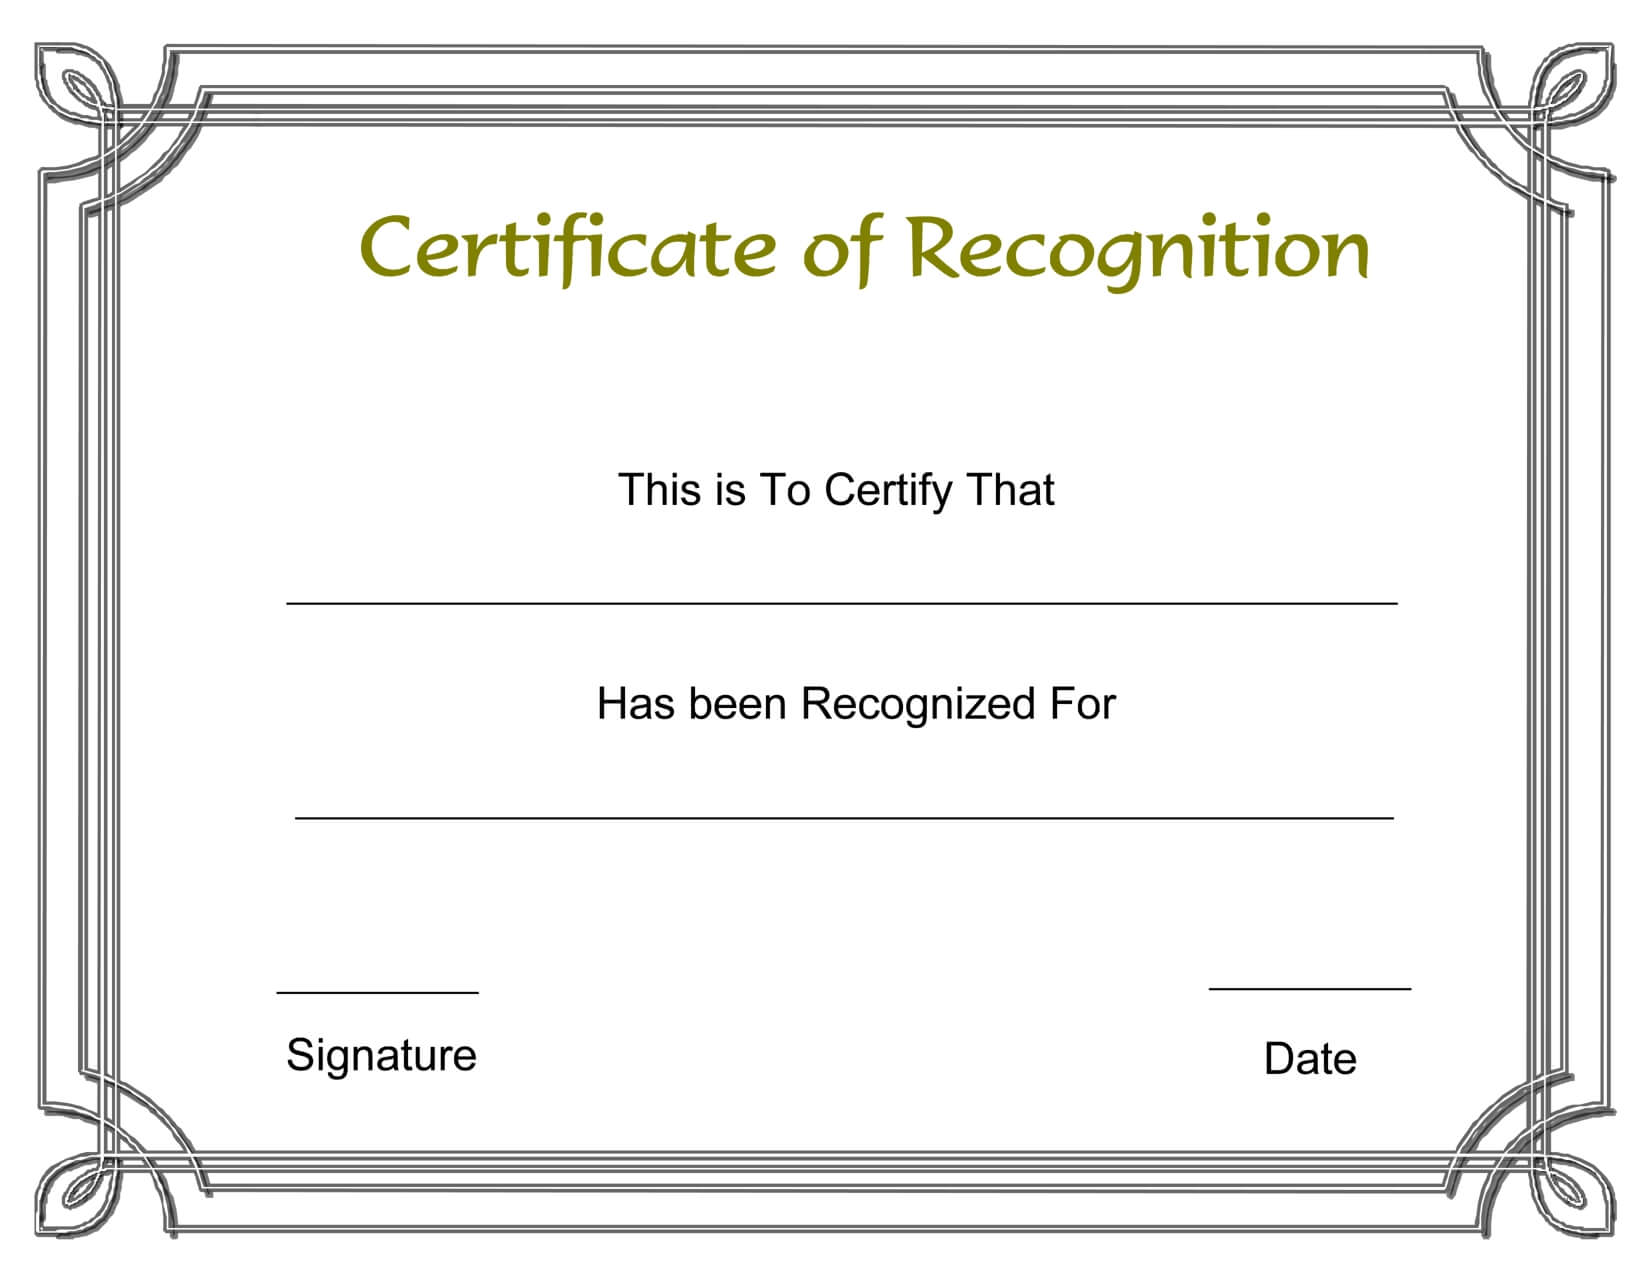 Certificate Template Recognition | Safebest.xyz In Printable Certificate Of Recognition Templates Free